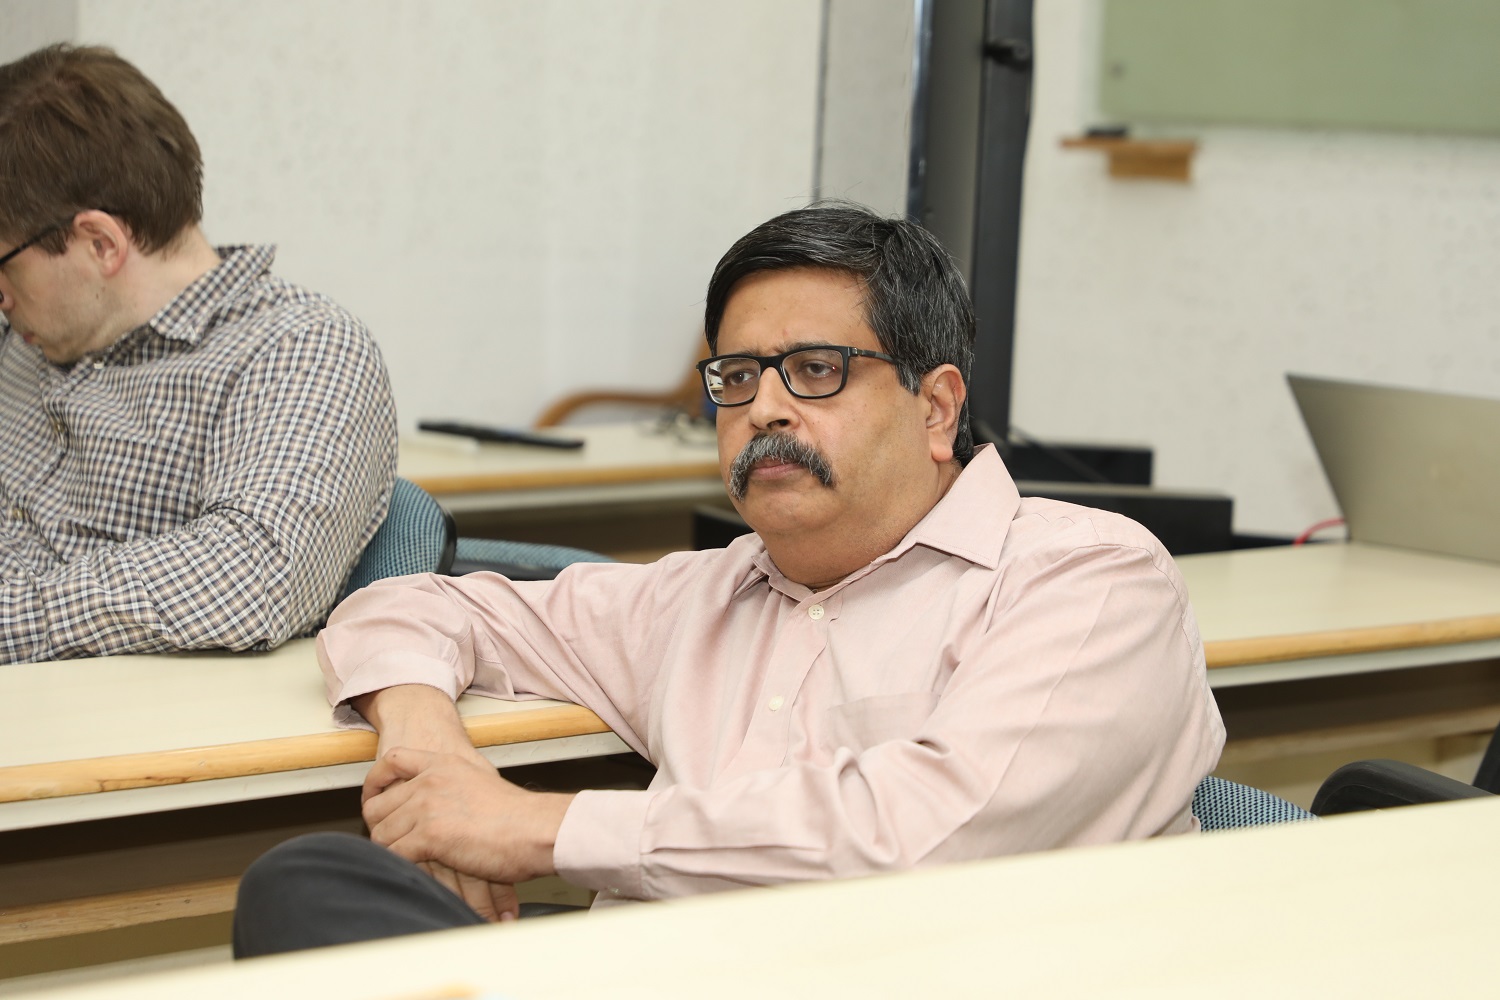 “I find the perspectives of Pre-doc students interesting. It is an enriching experience to teach you. Do use the resources at IIMB wisely,” said Prof. Ganesh Prabhu.